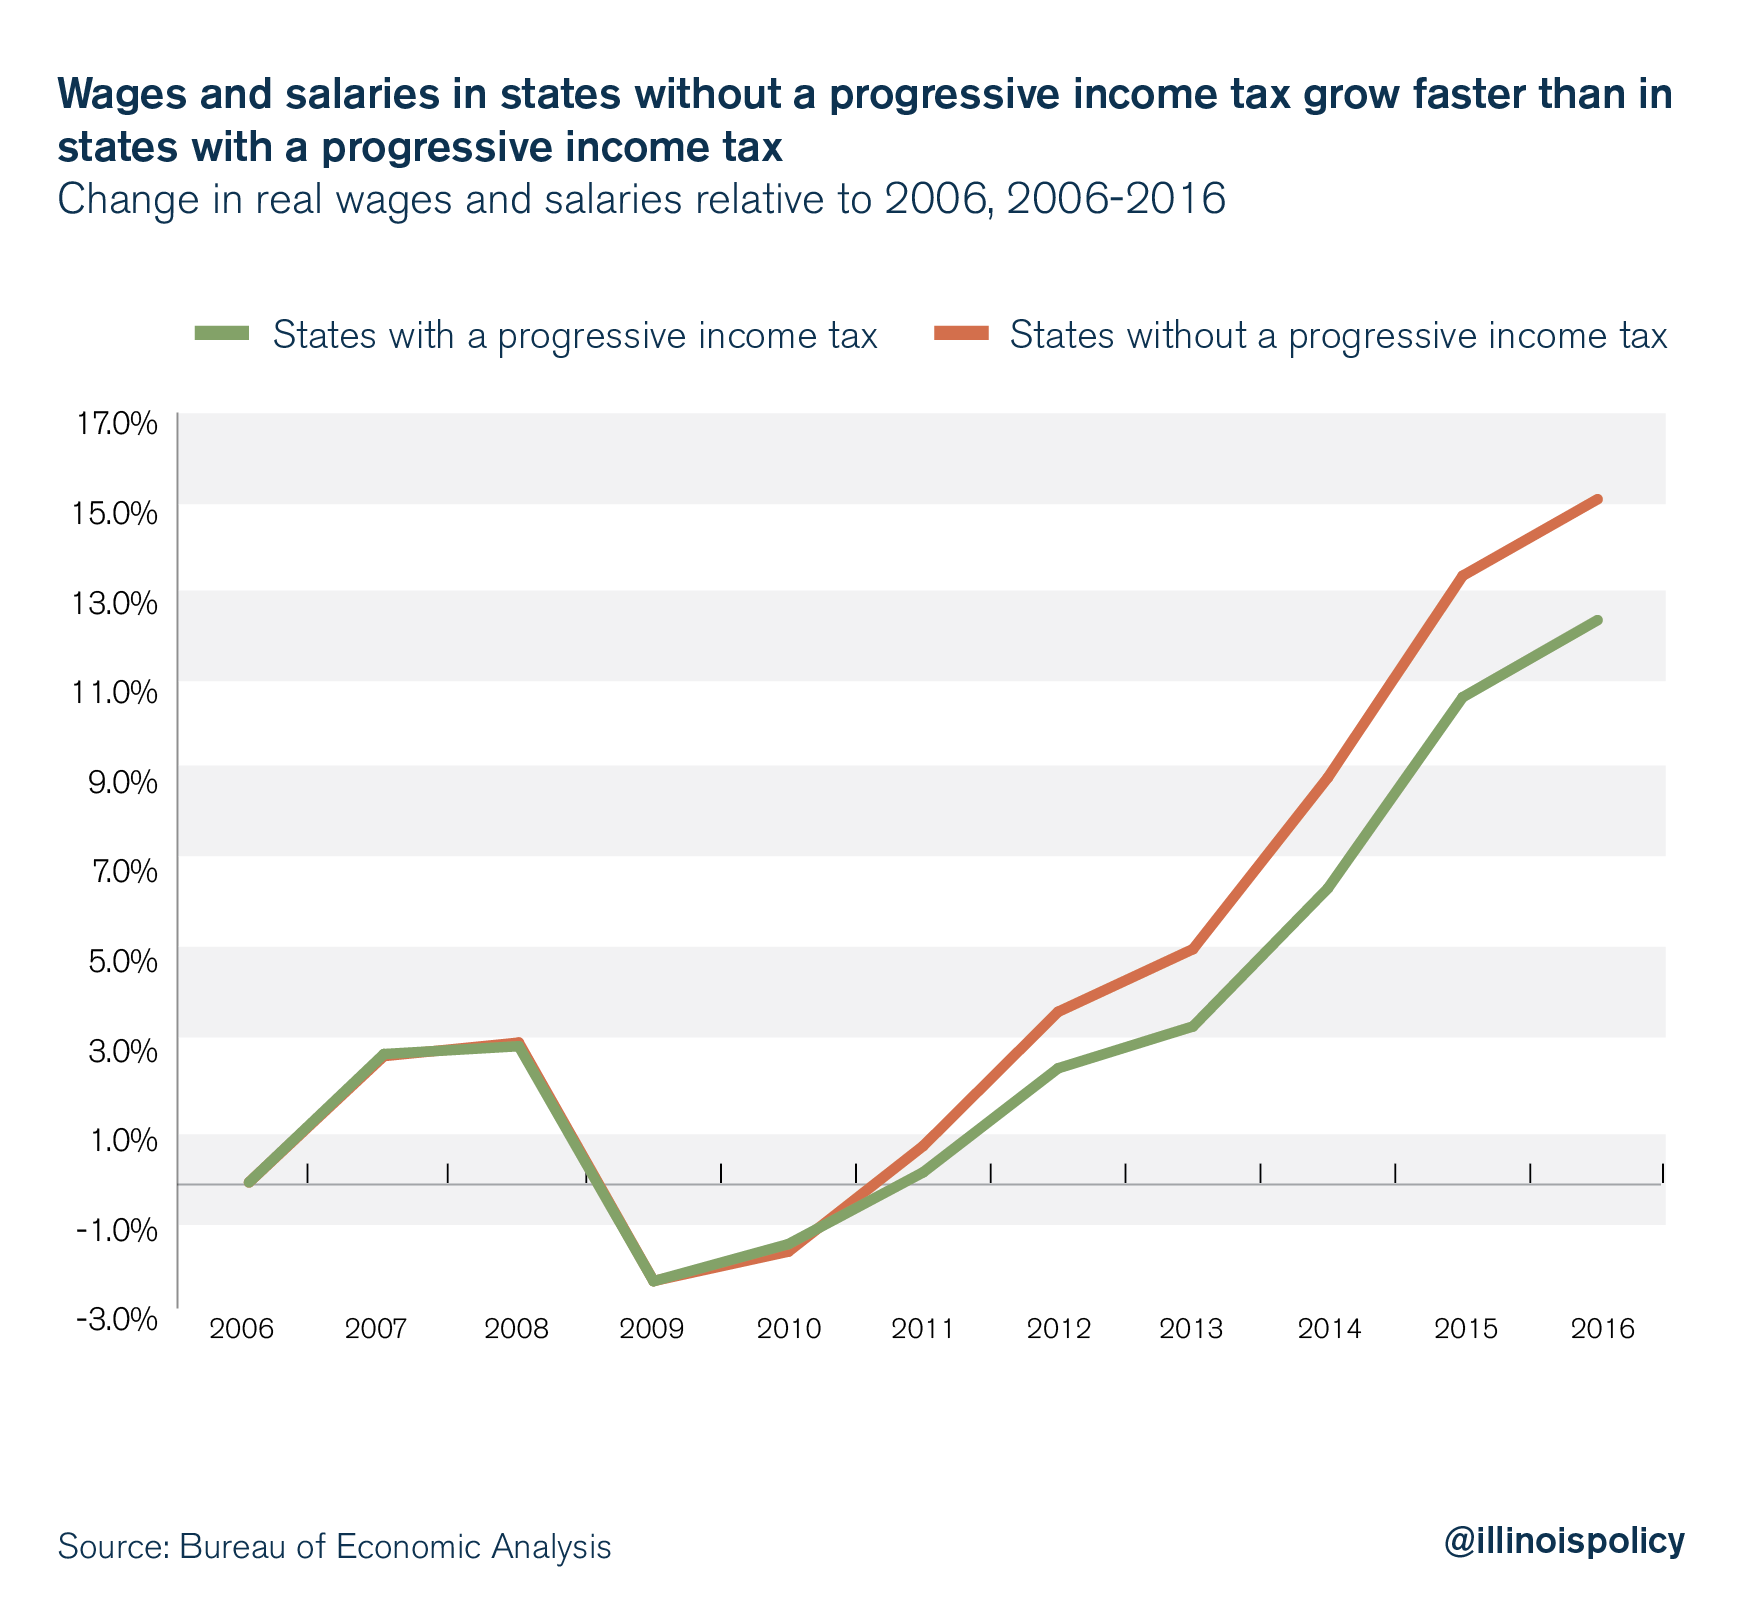 Wages and salaries in states without a progressive income tax grow faster than in states with a progressive income tax